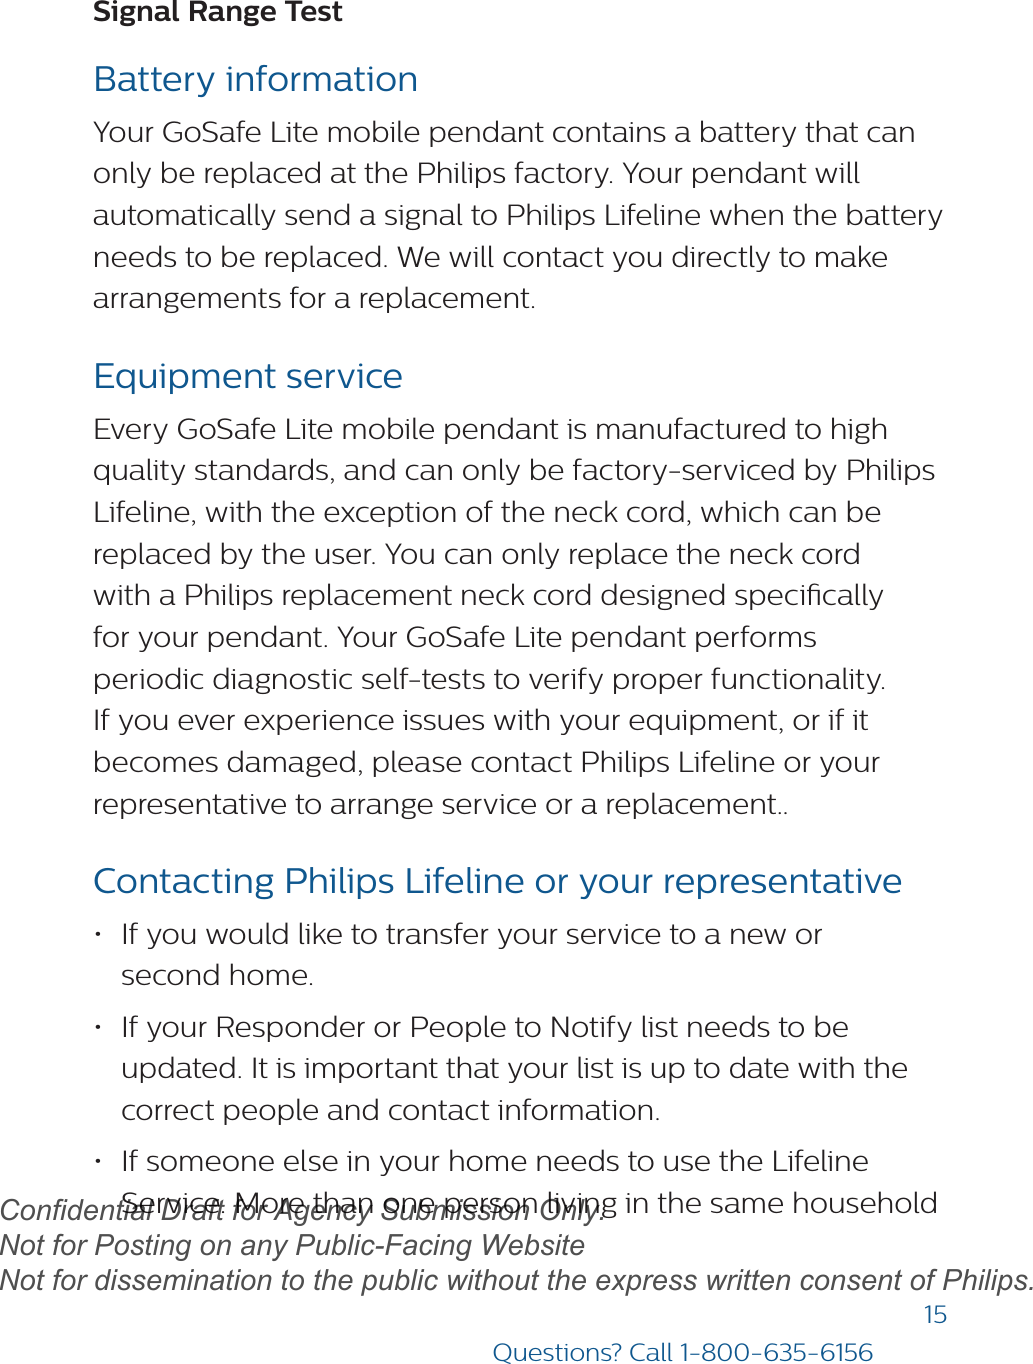 15Questions? Call 1-800-635-6156Signal Range Test Battery informationYour GoSafe Lite mobile pendant contains a battery that can only be replaced at the Philips factory. Your pendant will automatically send a signal to Philips Lifeline when the battery needs to be replaced. We will contact you directly to make arrangements for a replacement.Equipment serviceEvery GoSafe Lite mobile pendant is manufactured to high quality standards, and can only be factory-serviced by Philips Lifeline, with the exception of the neck cord, which can be replaced by the user. You can only replace the neck cord with a Philips replacement neck cord designed specically for your pendant. Your GoSafe Lite pendant performs periodic diagnostic self-tests to verify proper functionality. If you ever experience issues with your equipment, or if it becomes damaged, please contact Philips Lifeline or your representative to arrange service or a replacement..Contacting Philips Lifeline or your representative •If you would like to transfer your service to a new orsecond home.•If your Responder or People to Notify list needs to beupdated. It is important that your list is up to date with thecorrect people and contact information.•If someone else in your home needs to use the LifelineService. More than one person living in the same householddraftConfidential Draft for Agency Submission Only.   Not for Posting on any Public-Facing Website Not for dissemination to the public without the express written consent of Philips.